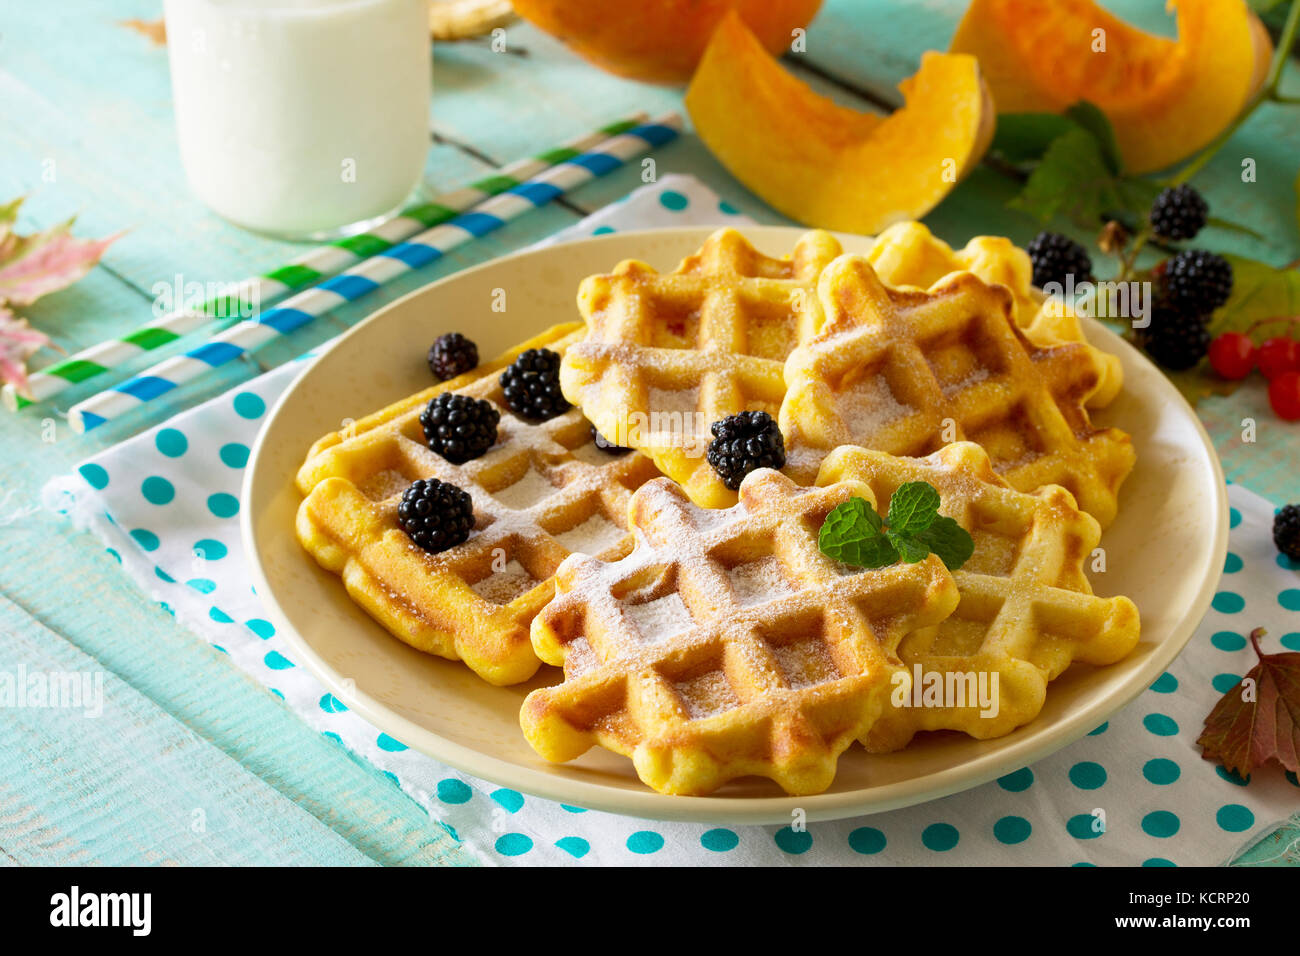 Breakfast table with pumpkin waffles, milk and fresh blackberry berries on a wooden kitchen table. Stock Photo